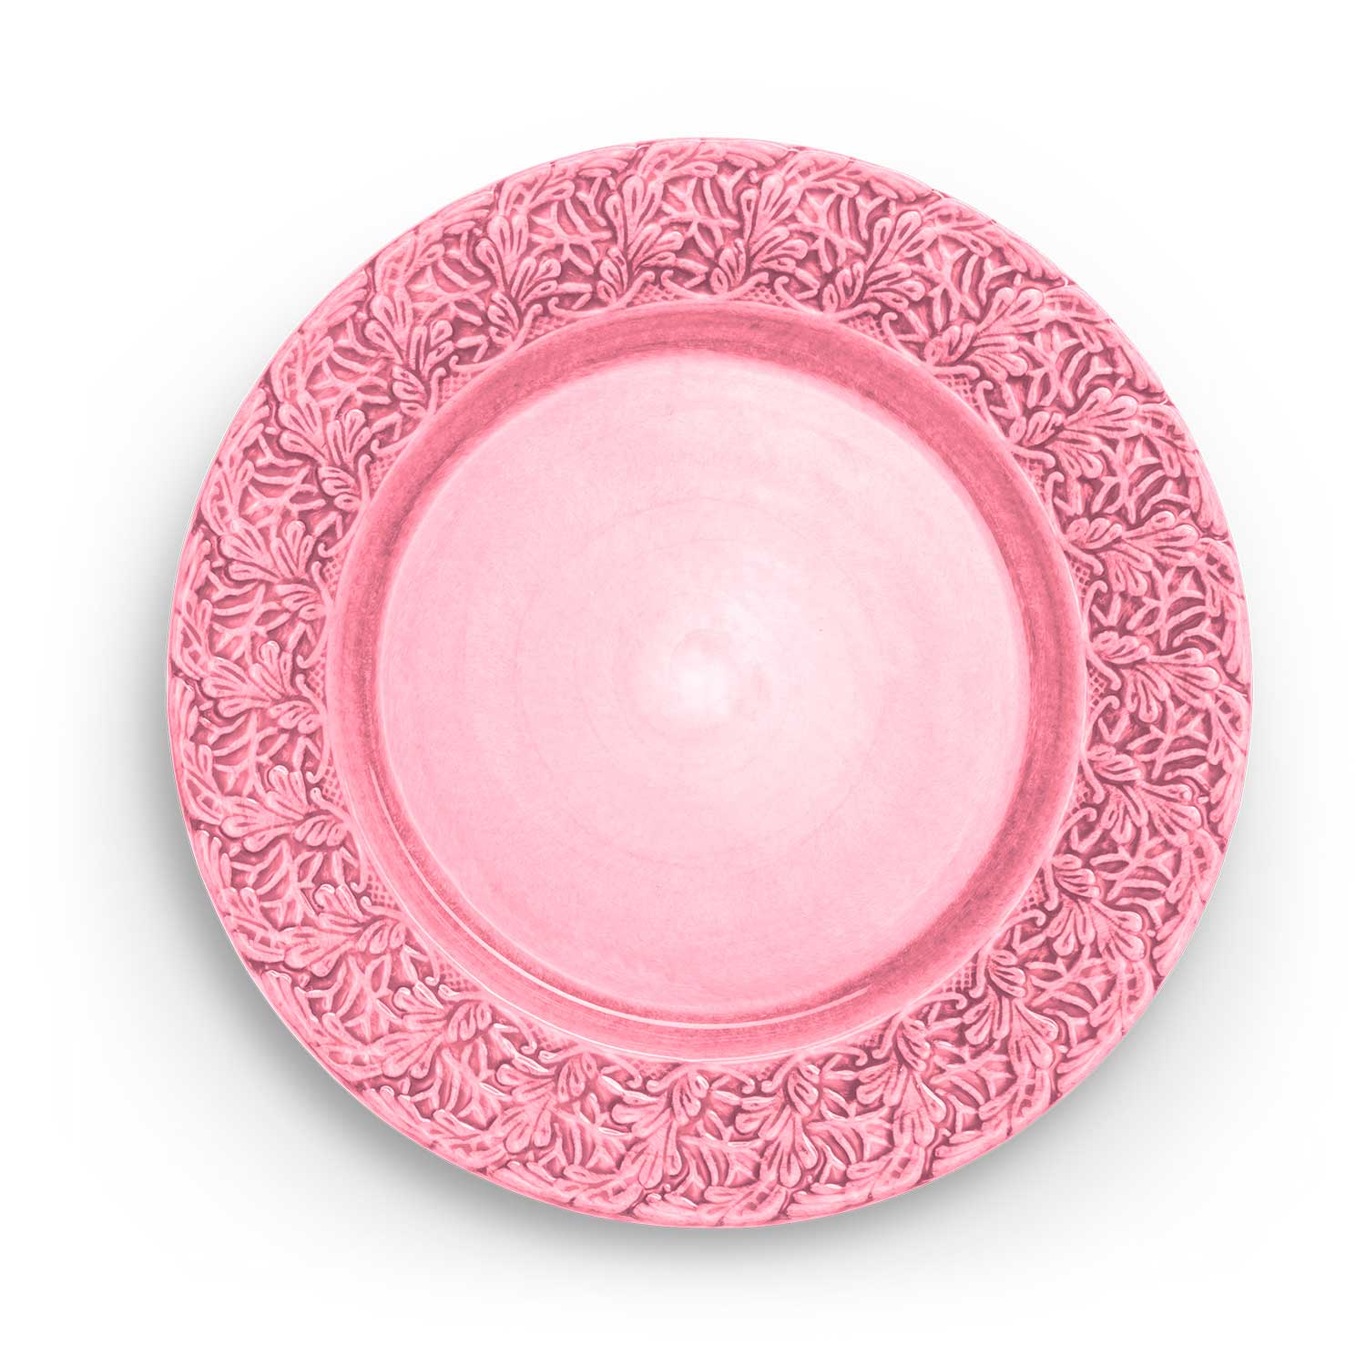 Lace Plate 25 cm, Pink